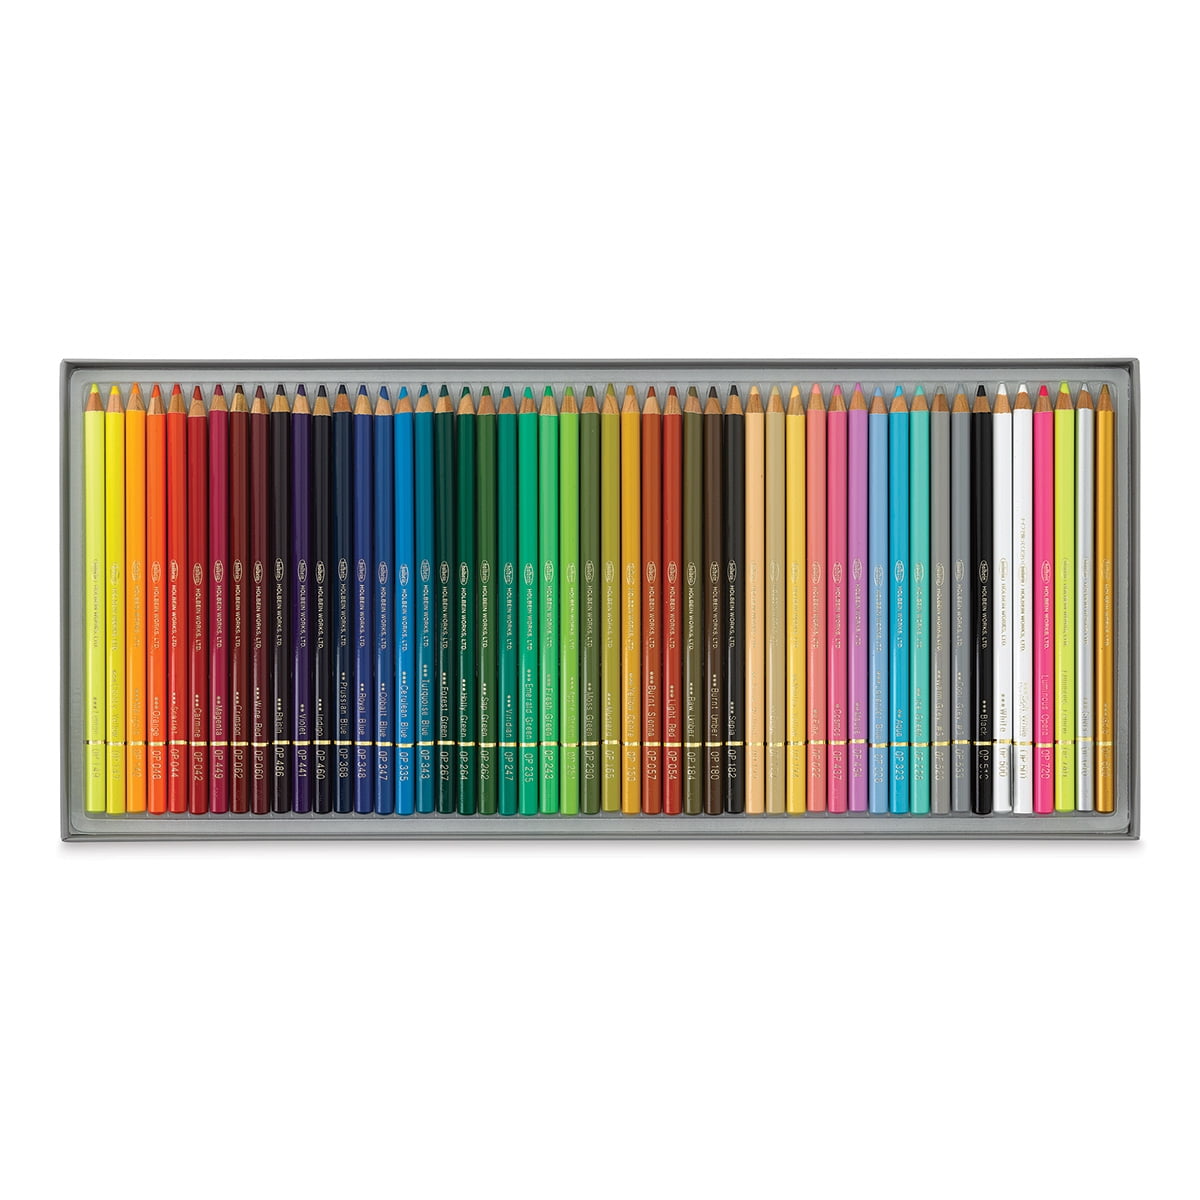 Holbein Artists' Colored Pencils - Basic Tones, Set of 50, Cardboard Box 